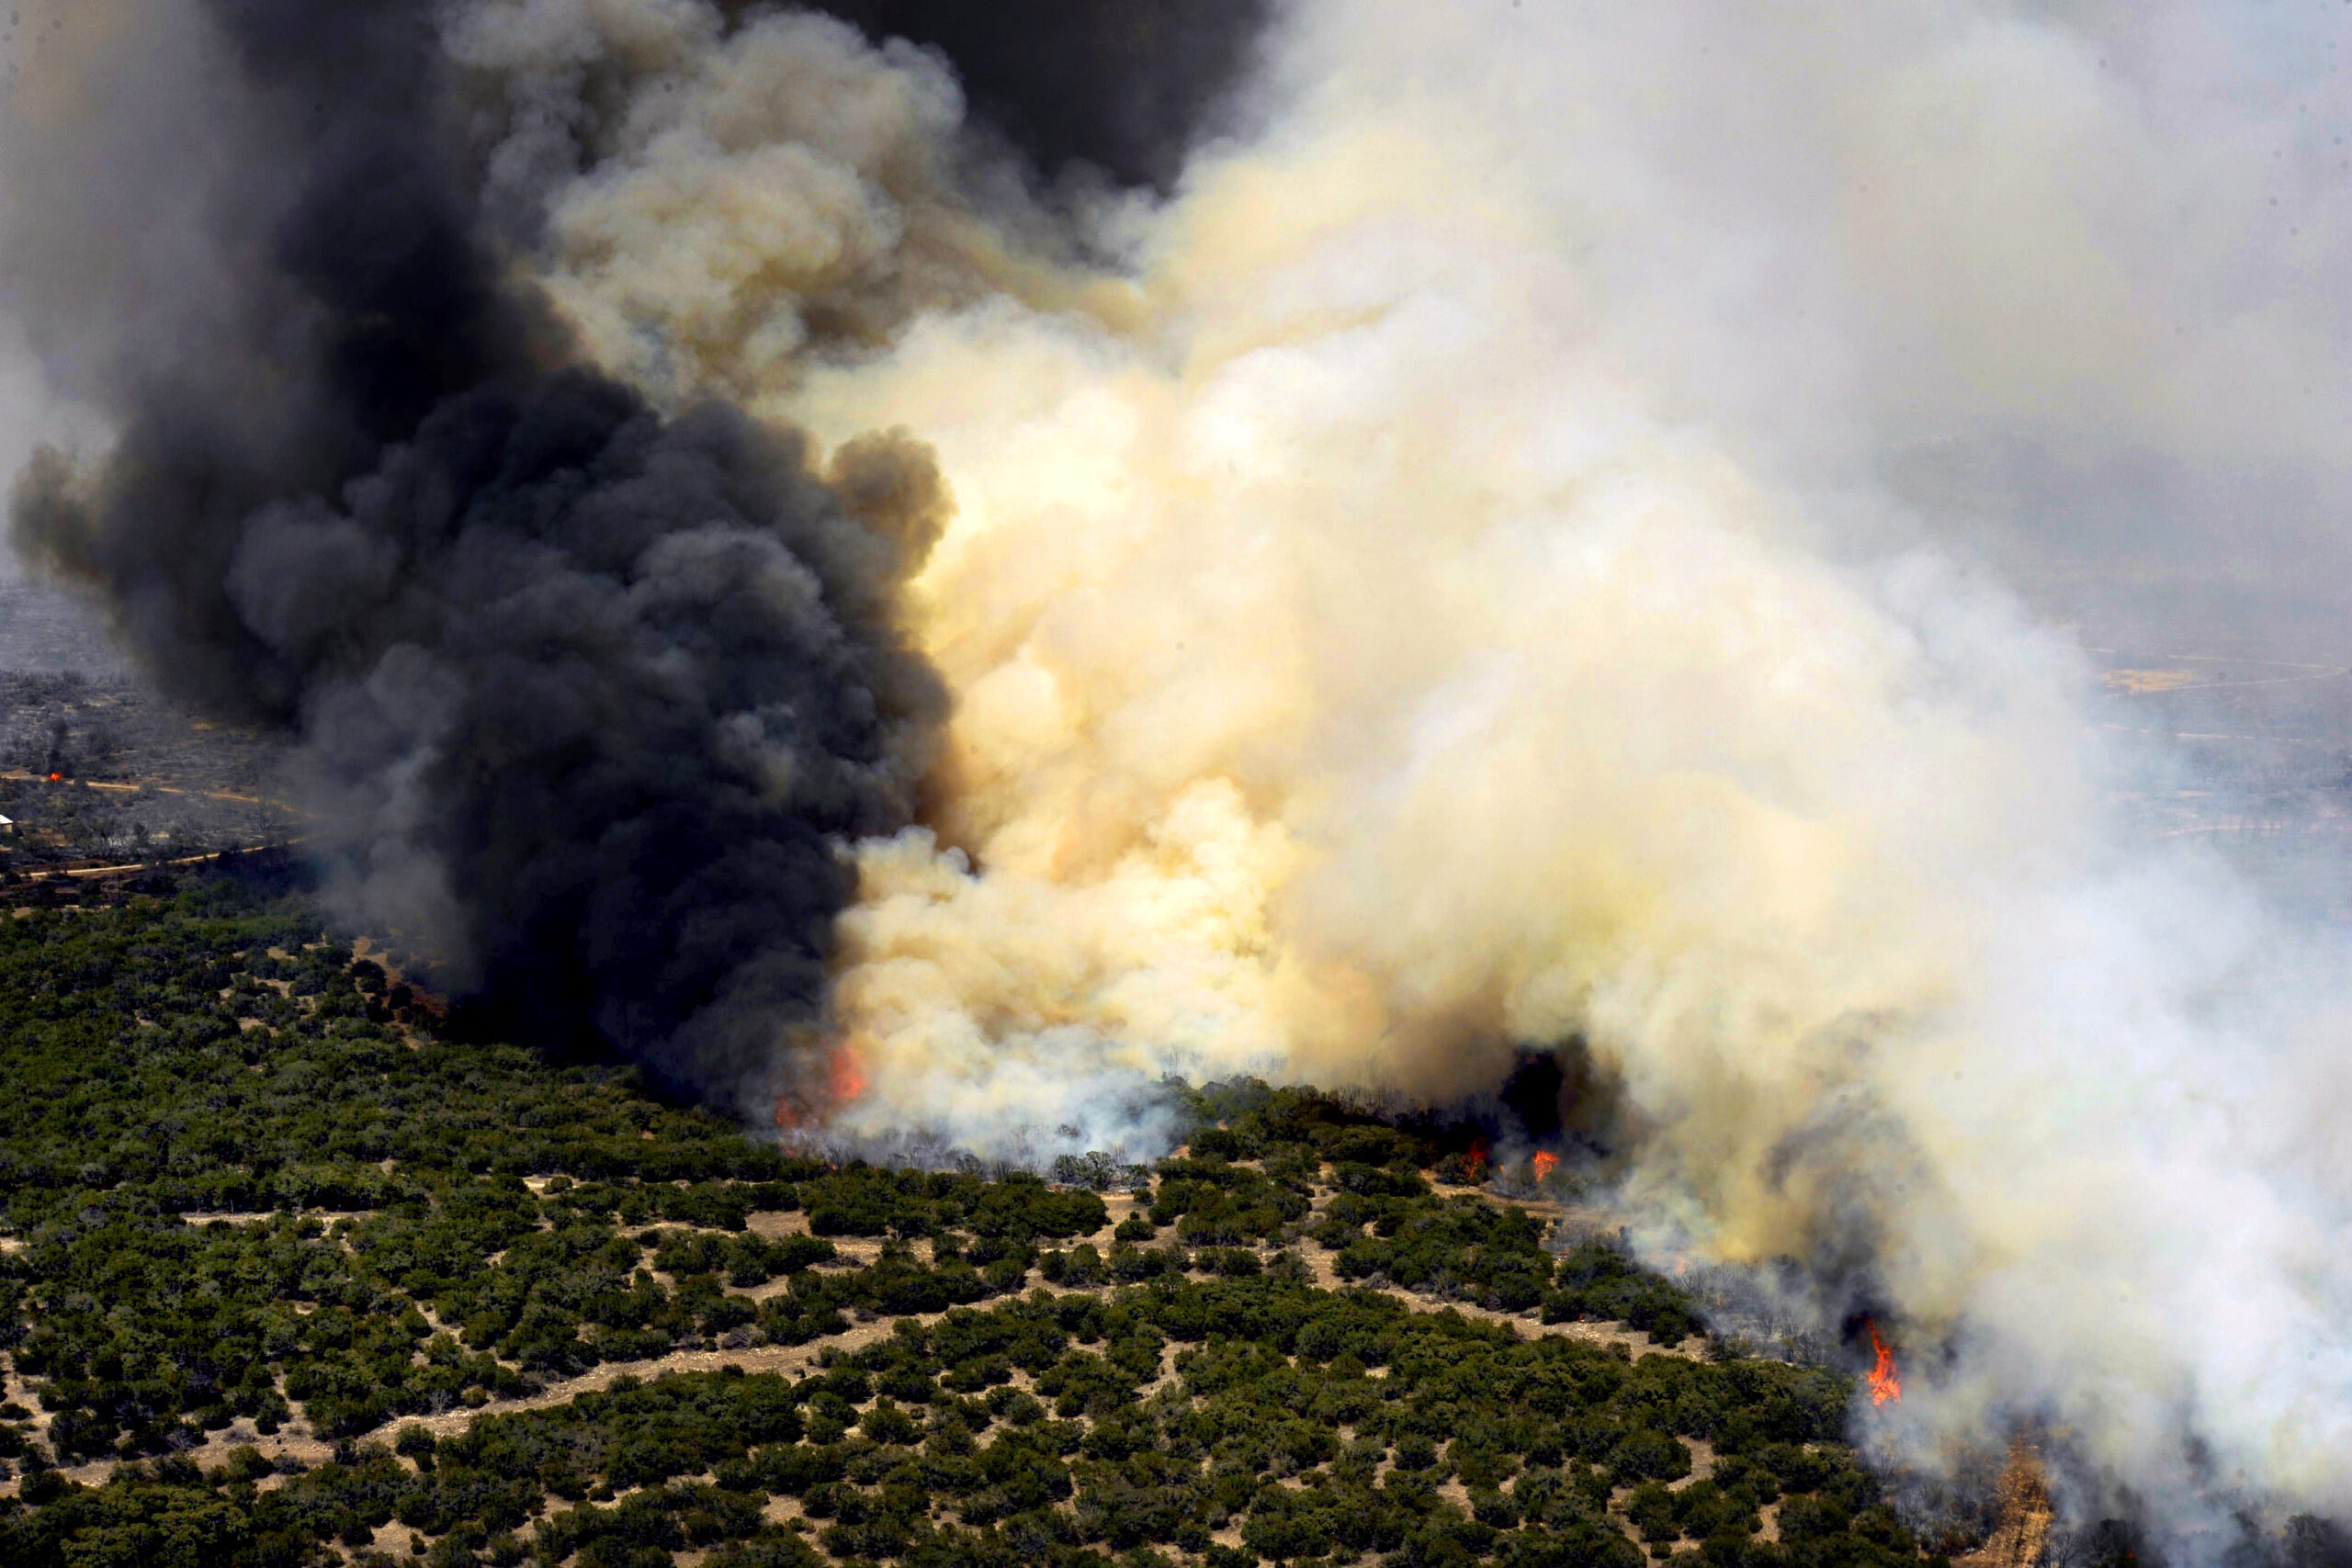 The Oasis wildfire burns in West Texas as fire fighting crews try to contain it, April 26. Wildfires have spread across various parts of Texas and have burned more than 1,000 square miles of land.